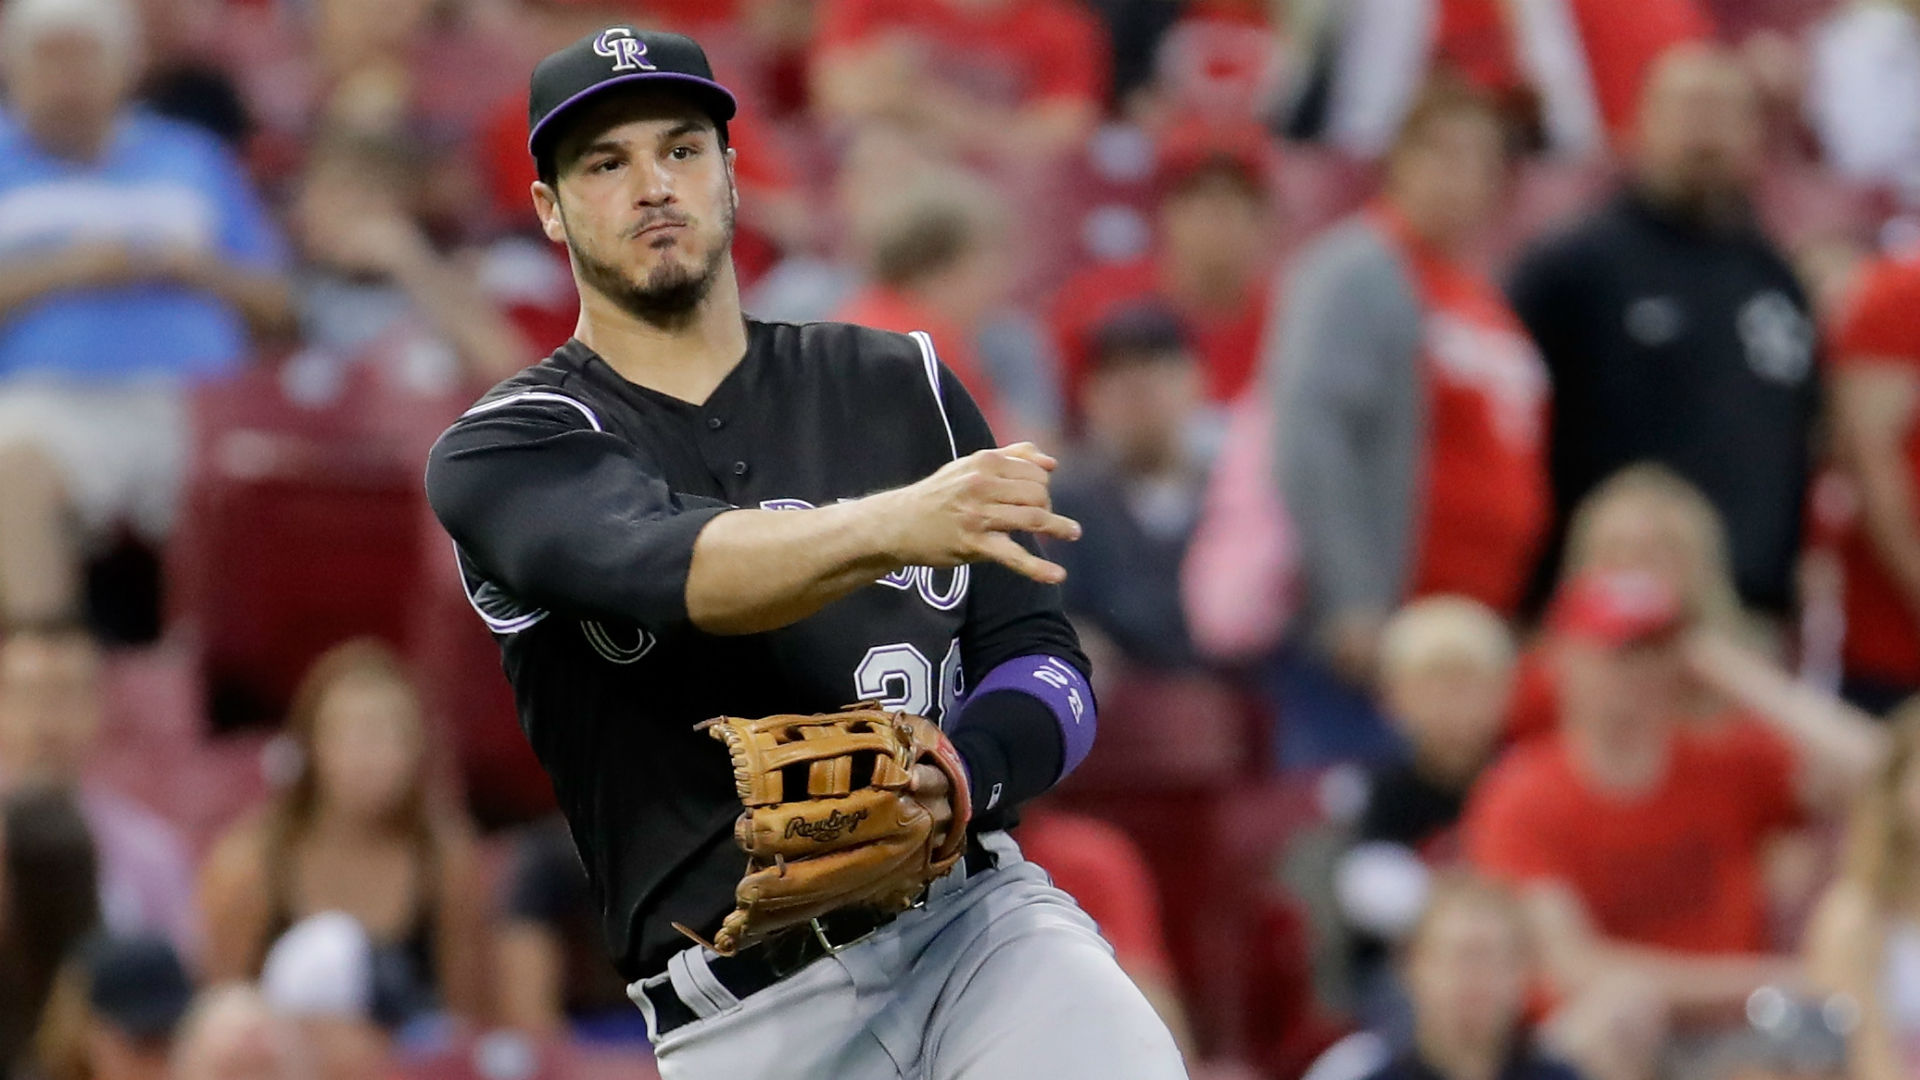 The report says the Yankees and Rockies have likely already discussed a deal for the third baseman who will be a free agent in 2020.